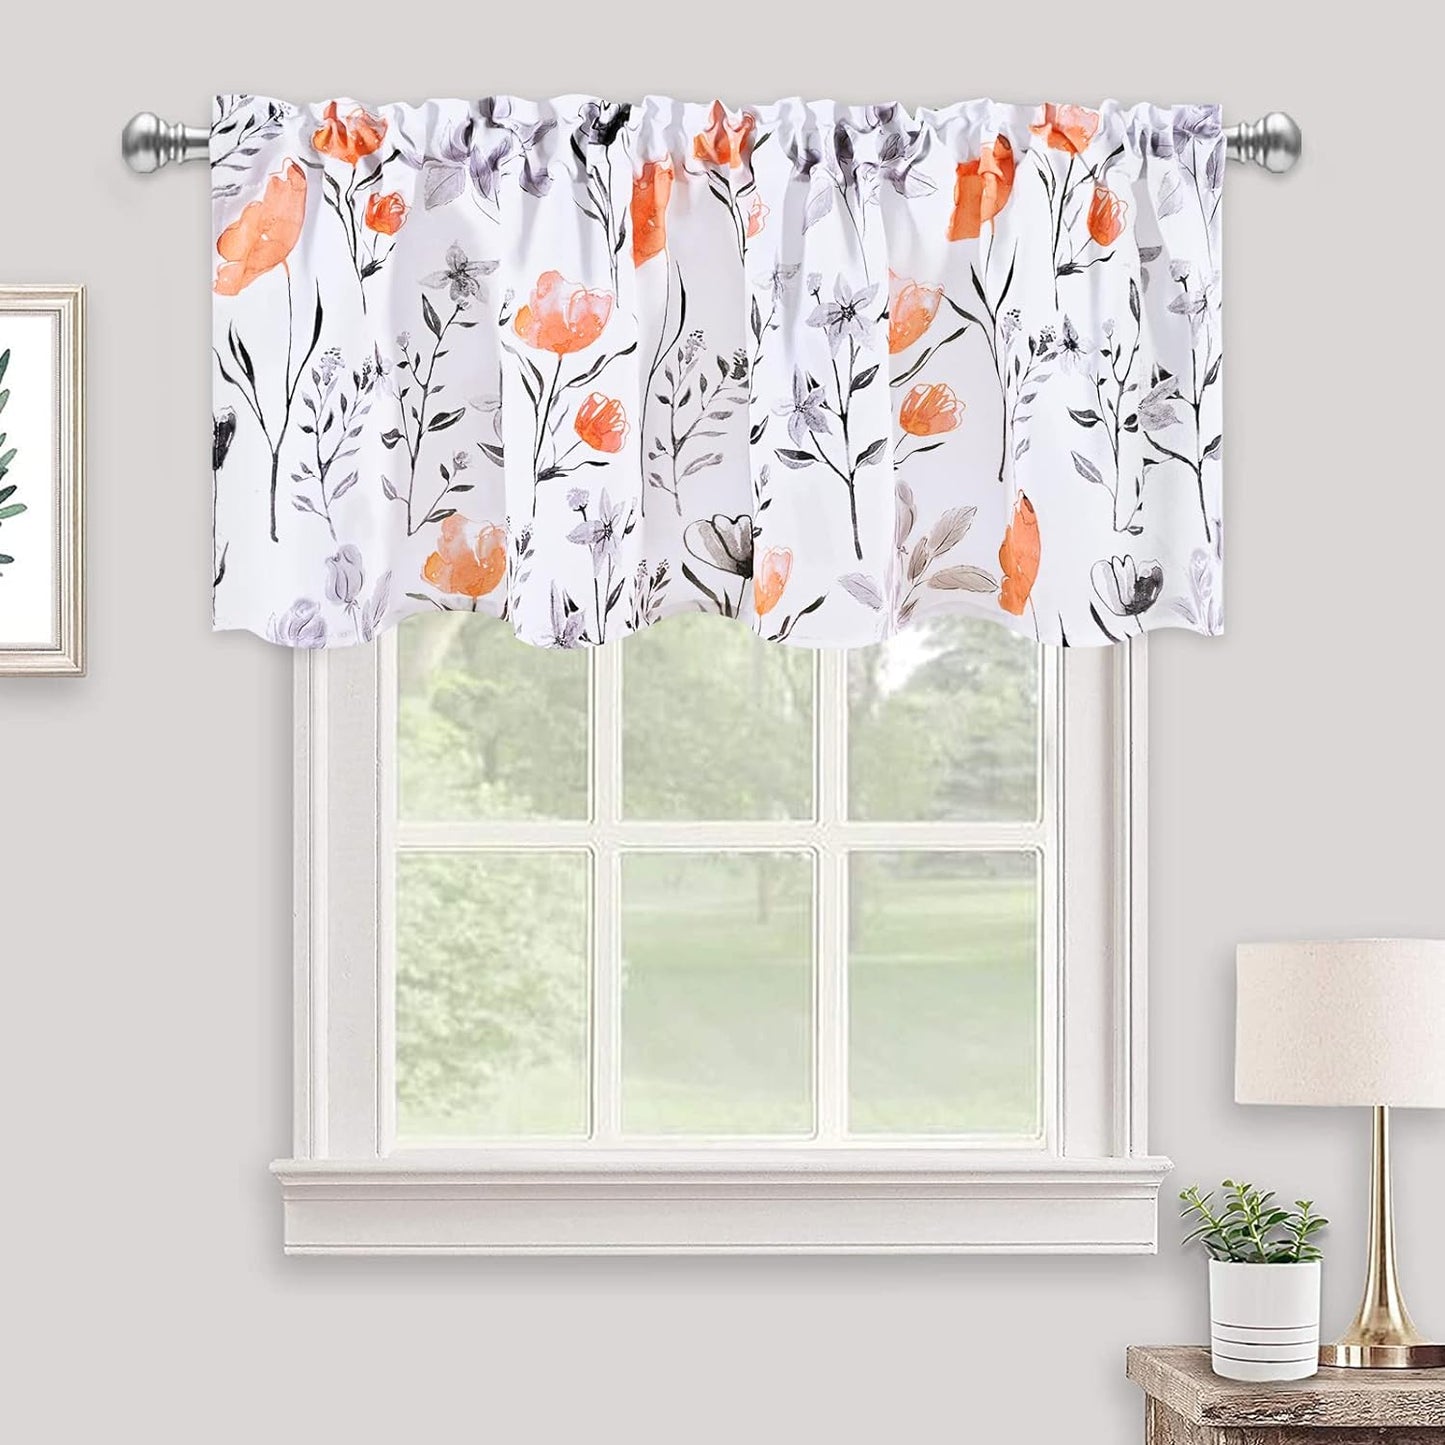 Likiyol Floral Kithchen Curtains 36 Inch Watercolor Flower Leaves Tier Curtains, Yellow and Gray Floral Cafe Curtains, Rod Pocket Small Window Curtain for Cafe Bathroom Bedroom Drapes  Likiyol Orange 18"L X 52"W 